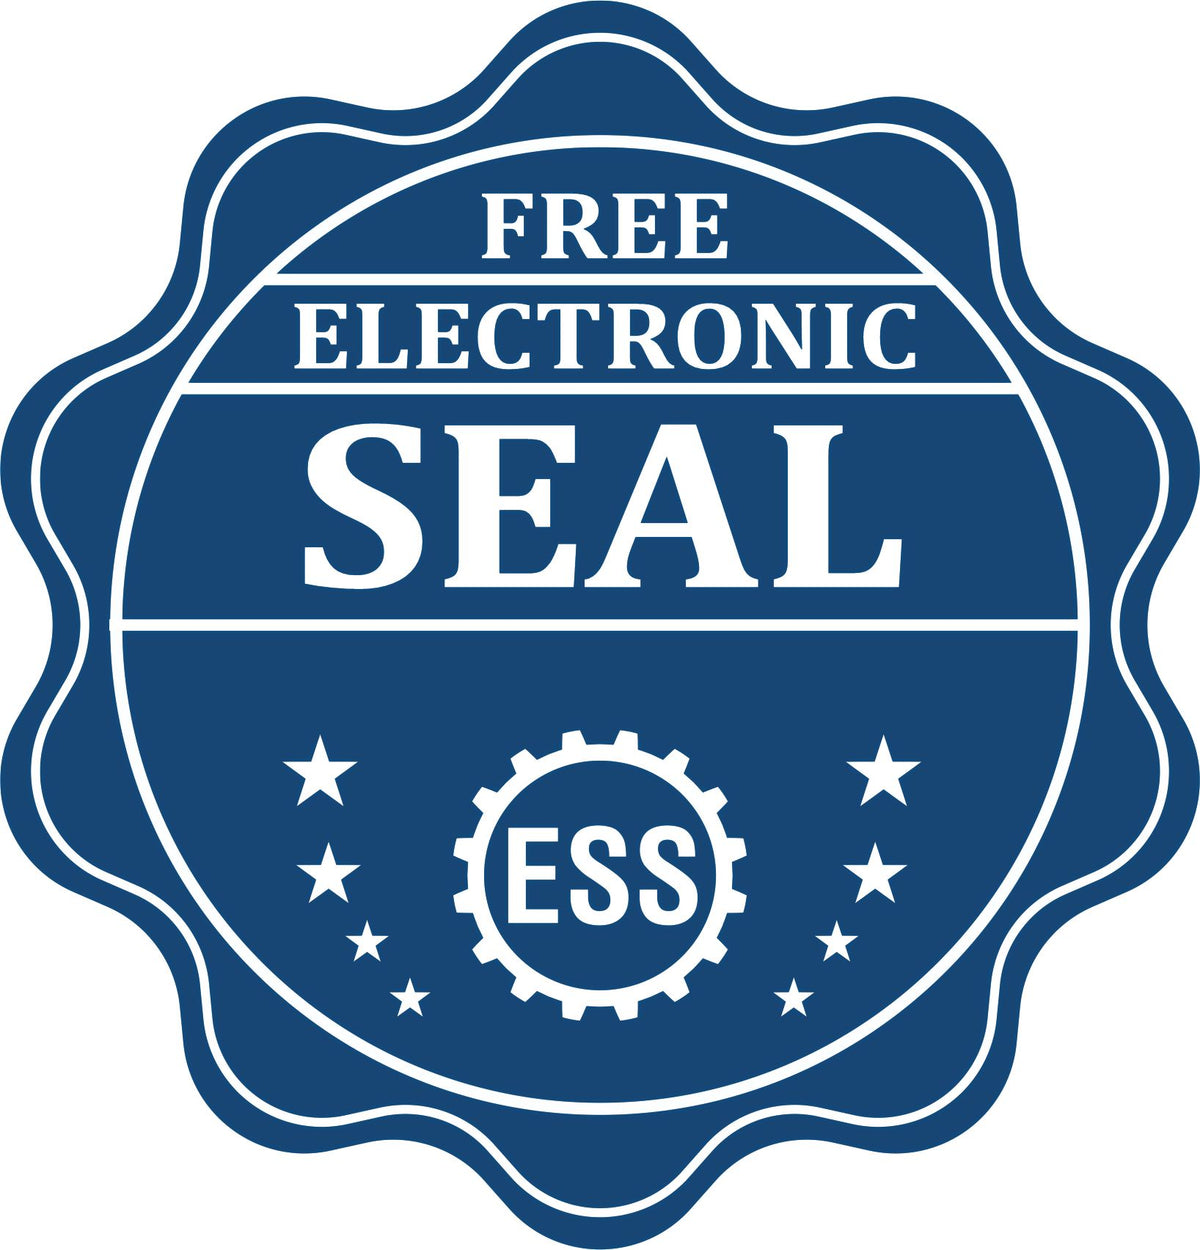 A badge showing a free electronic seal for the Hybrid Delaware Land Surveyor Seal with stars and the ESS gear on the emblem.